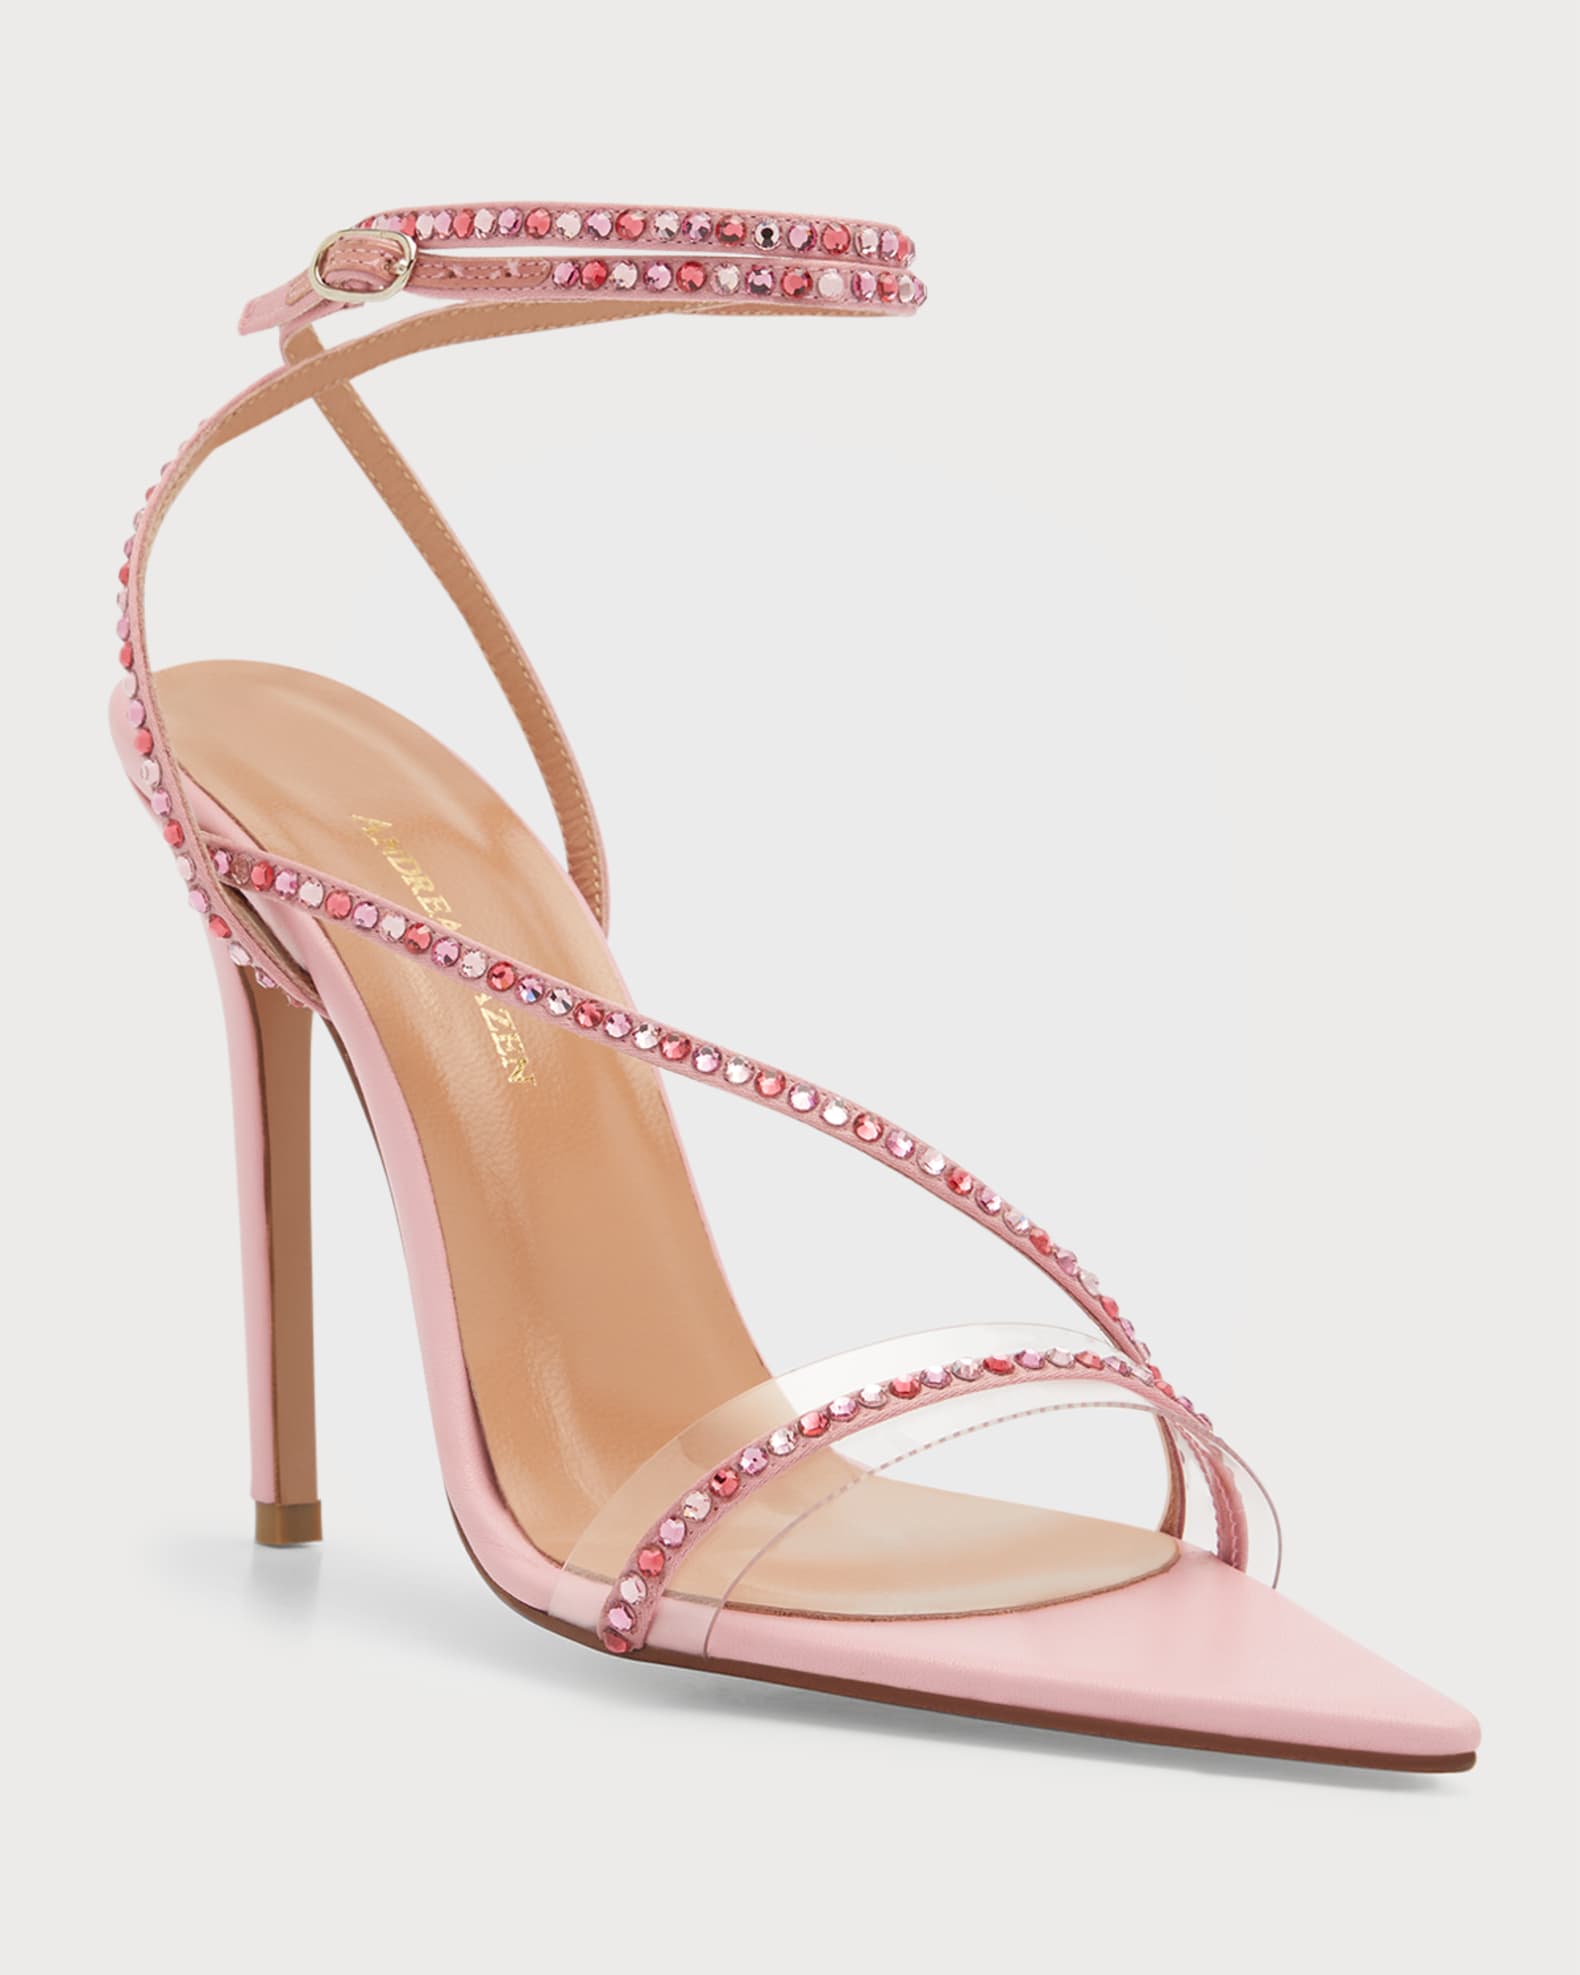 Andrea Wazen Dassy Crystal Leather Ankle-Strap Sandals | Neiman Marcus